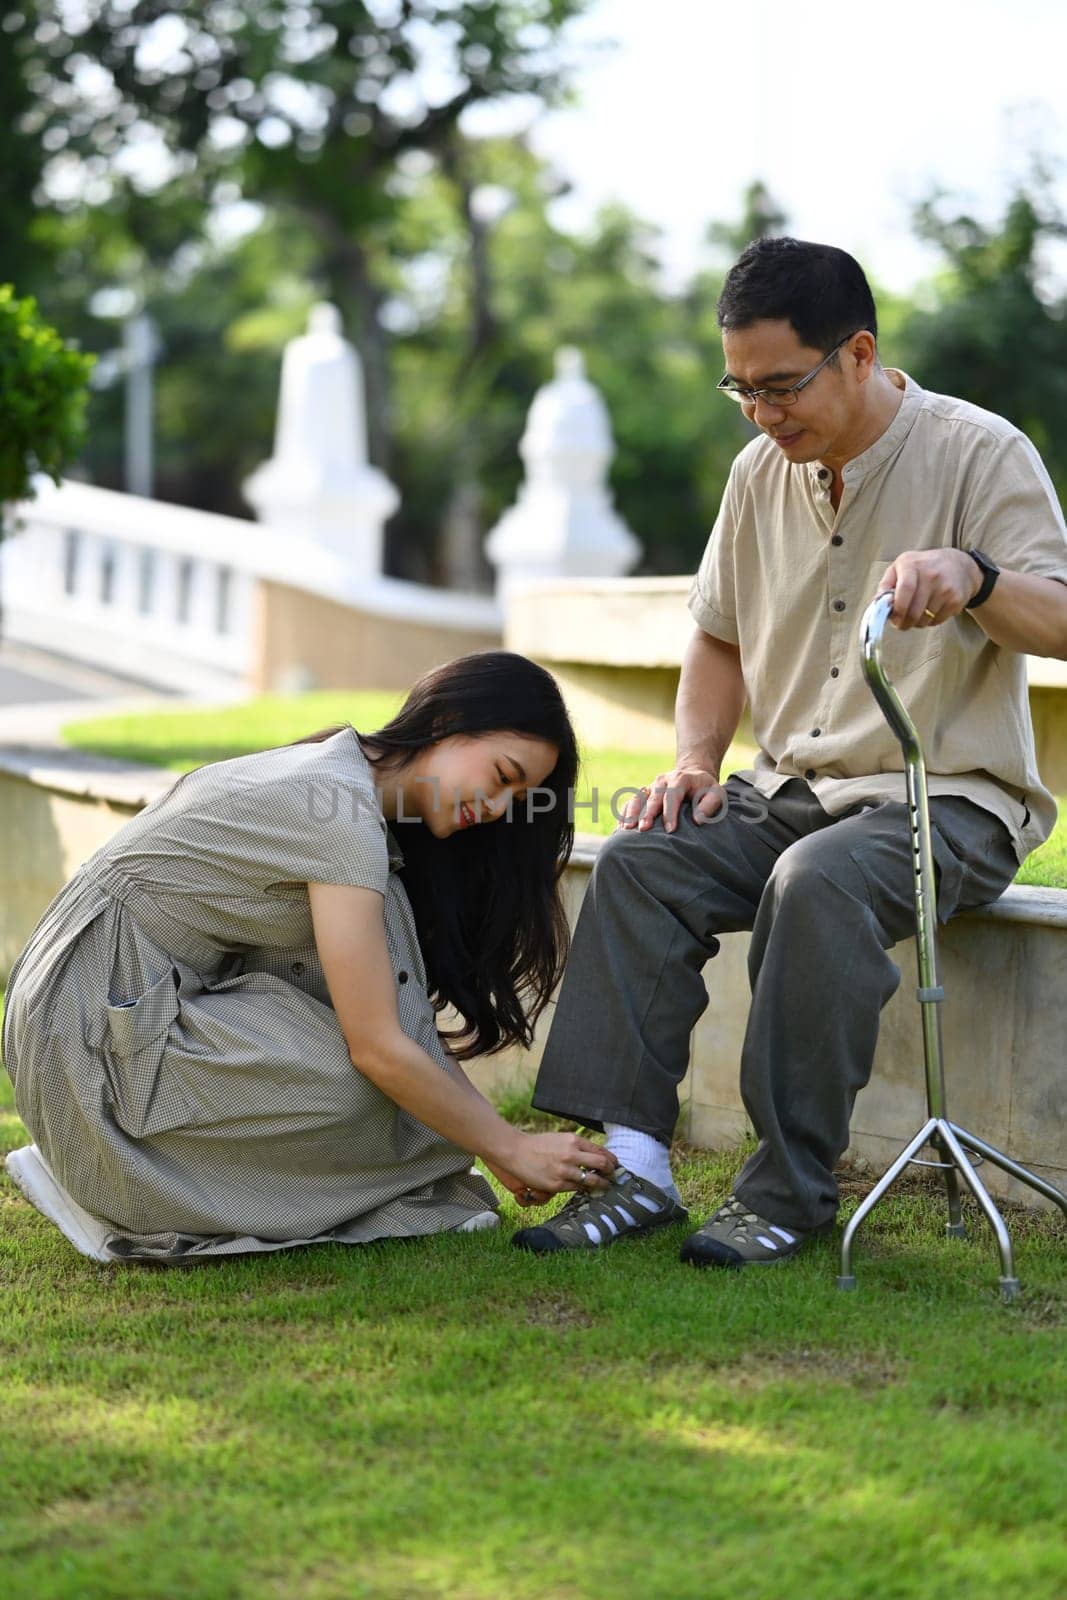 Caring young adult daughter helping her father tying shoelaces while relaxing in the public park.